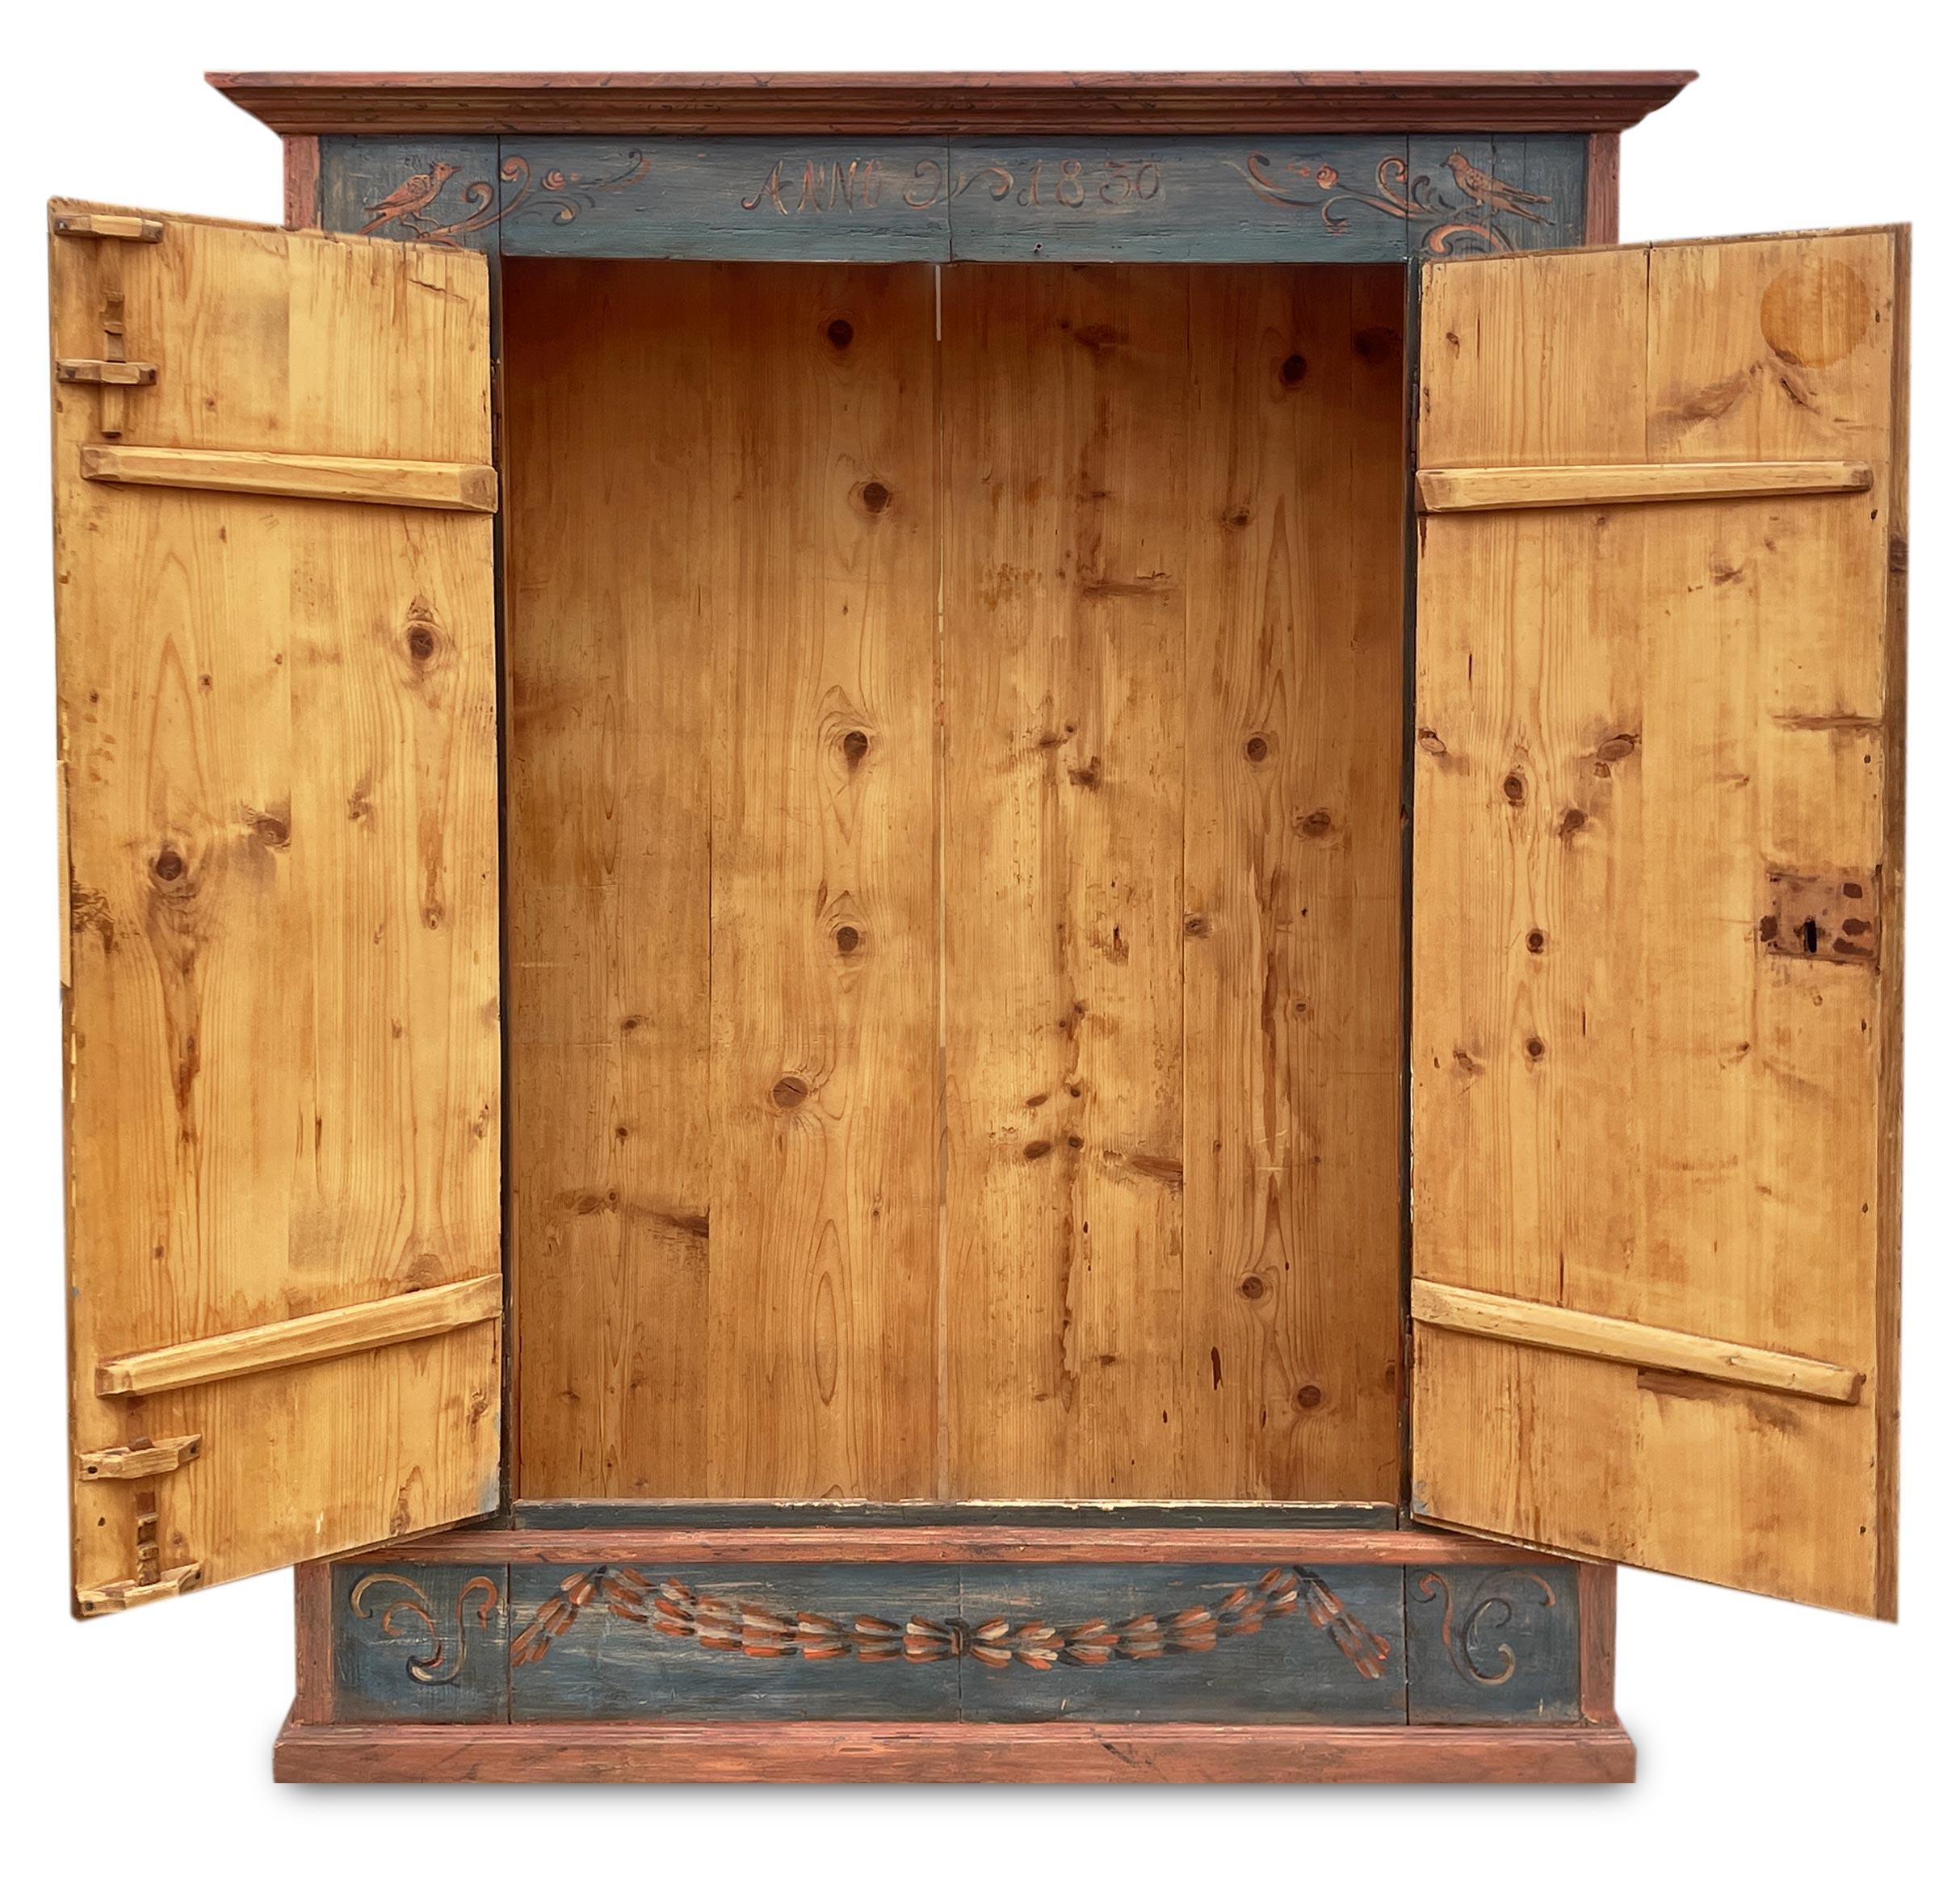 Rustic 1830 Blue Floral Painted Two Doors Cabin Wardrobe